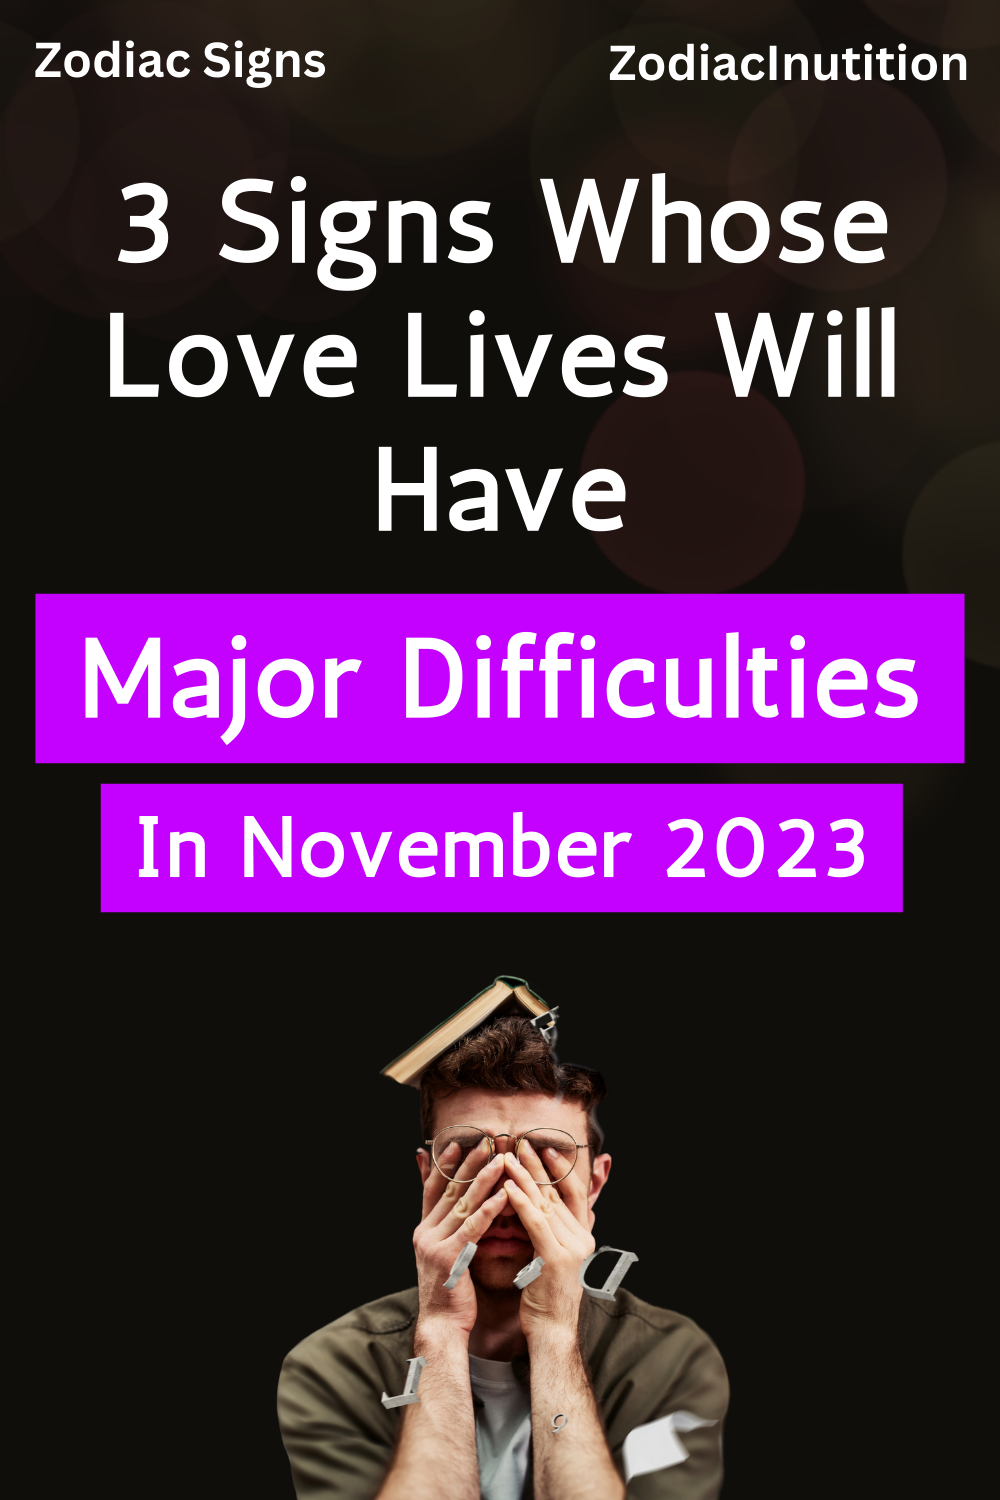 3 Signs Whose Love Lives Will Have Major Difficulties In November 2023